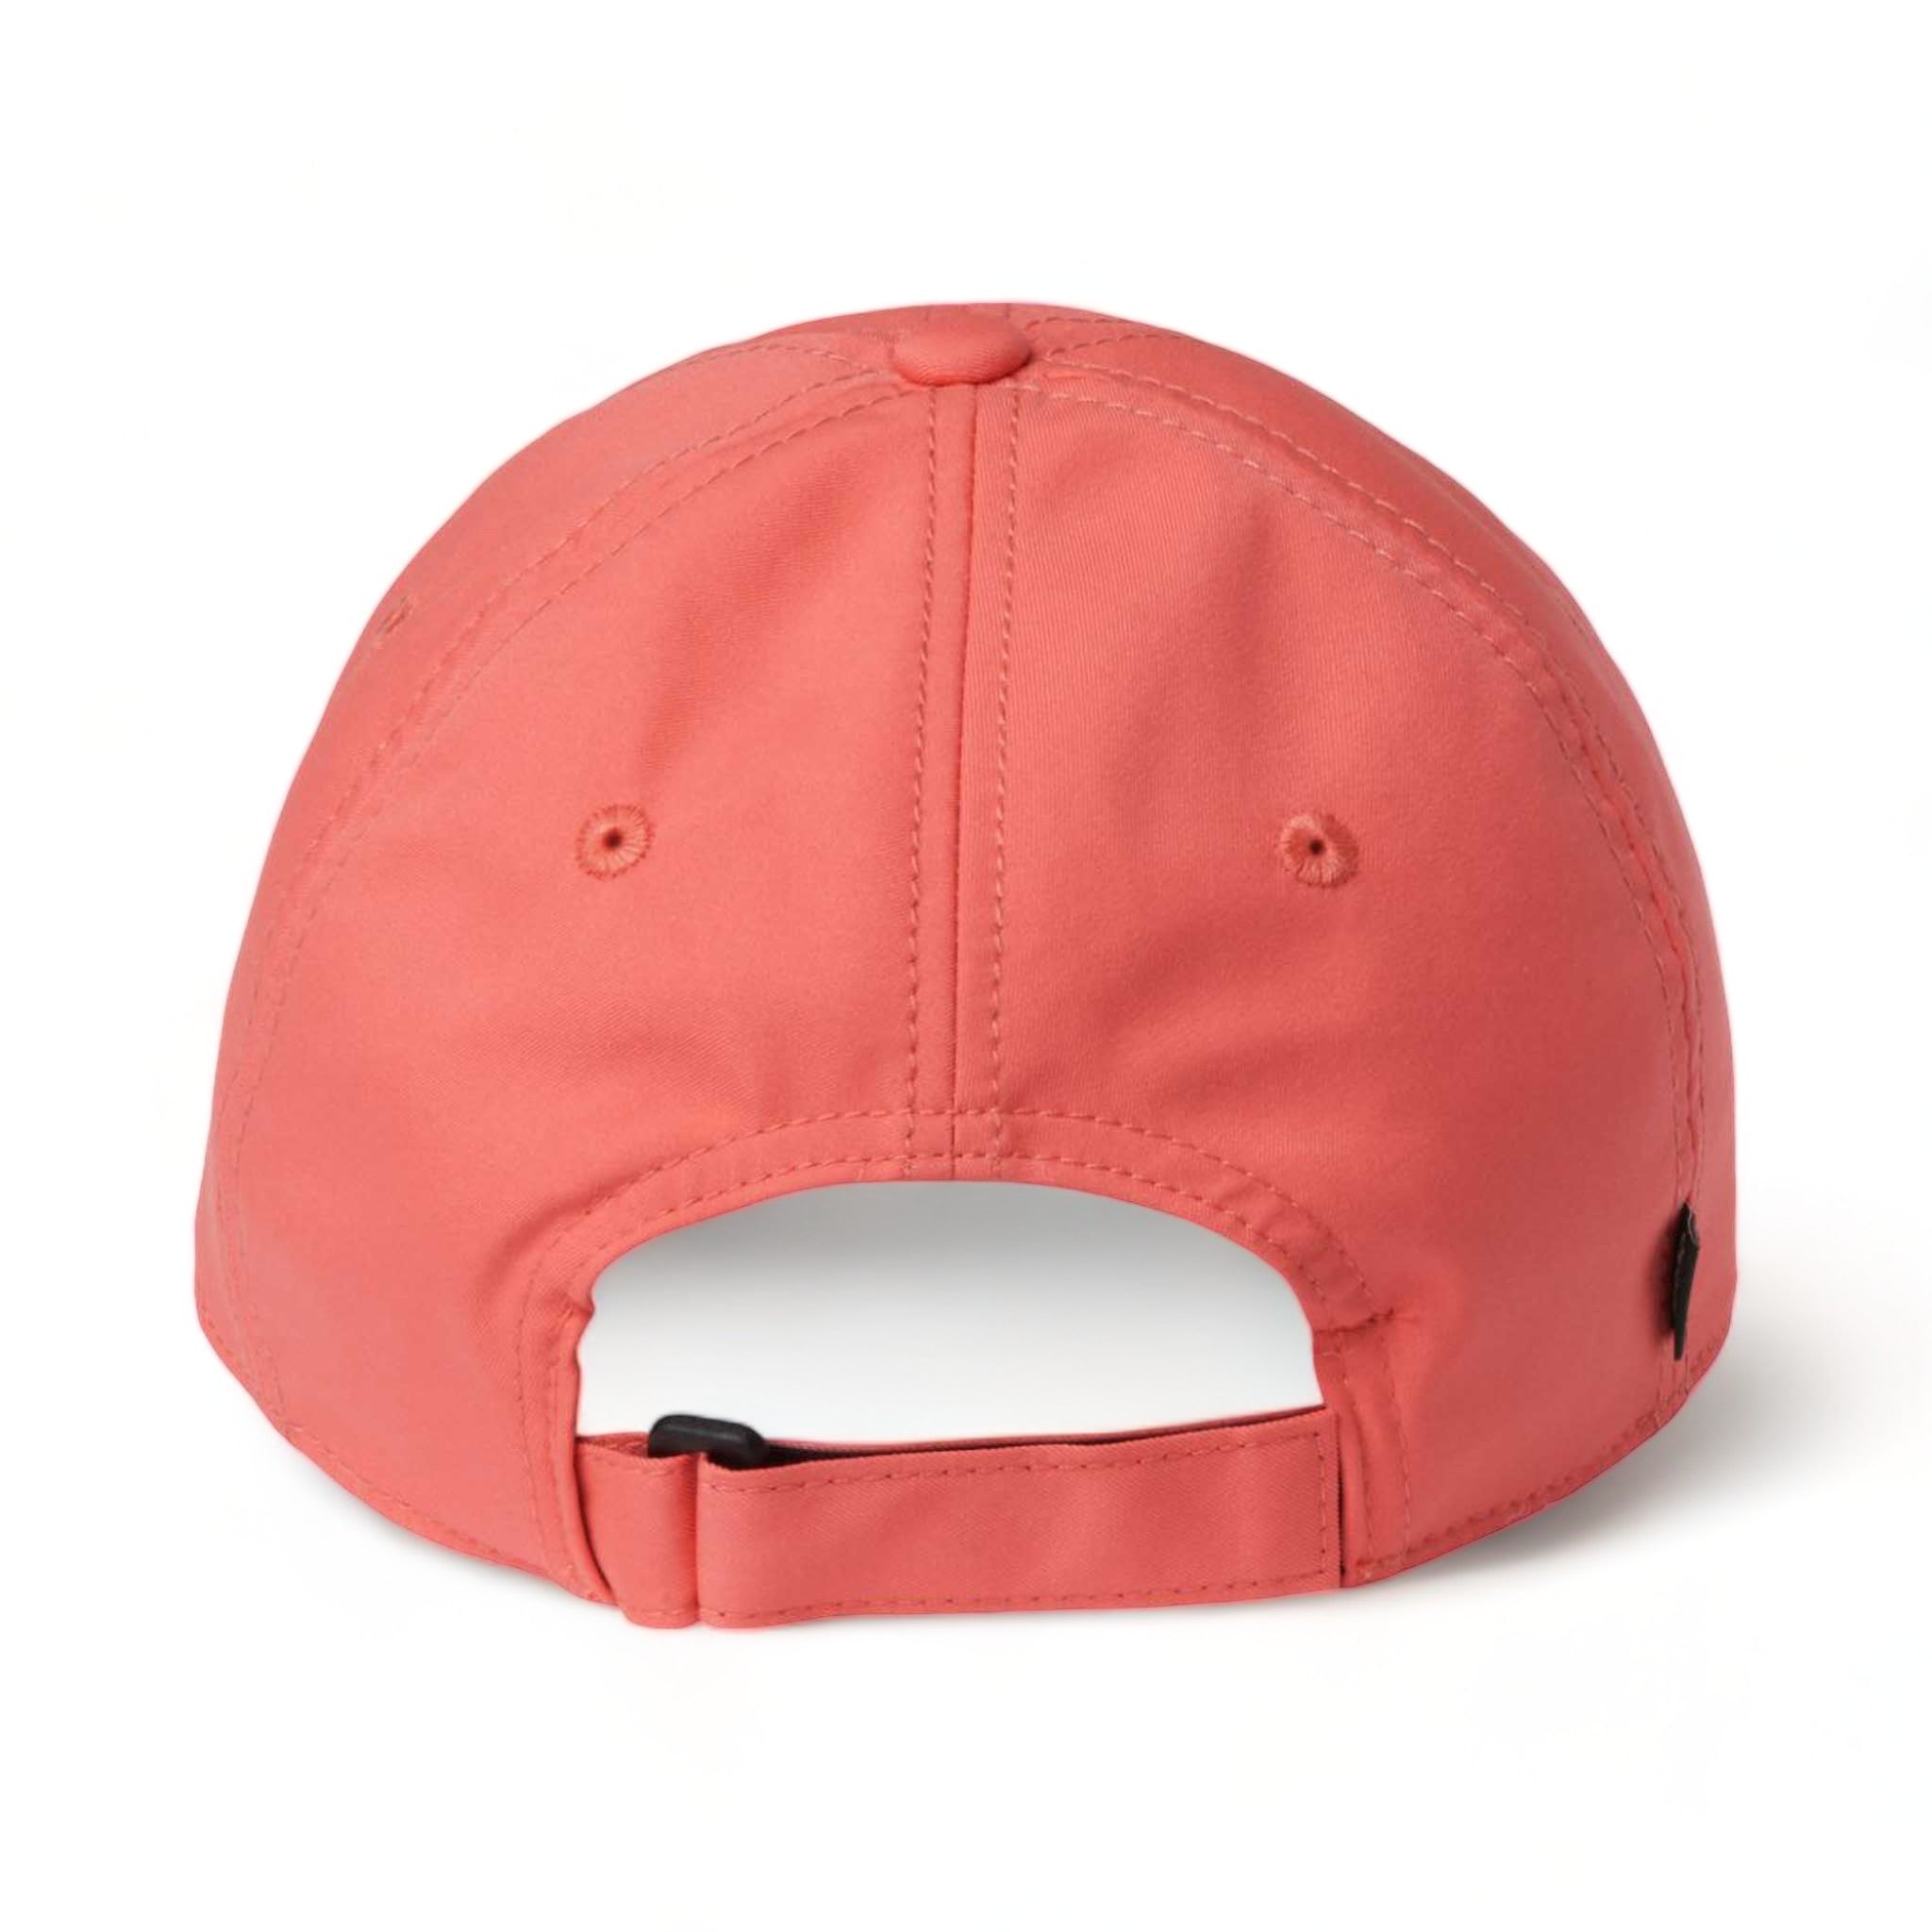 Back view of LEGACY CFA custom hat in coral